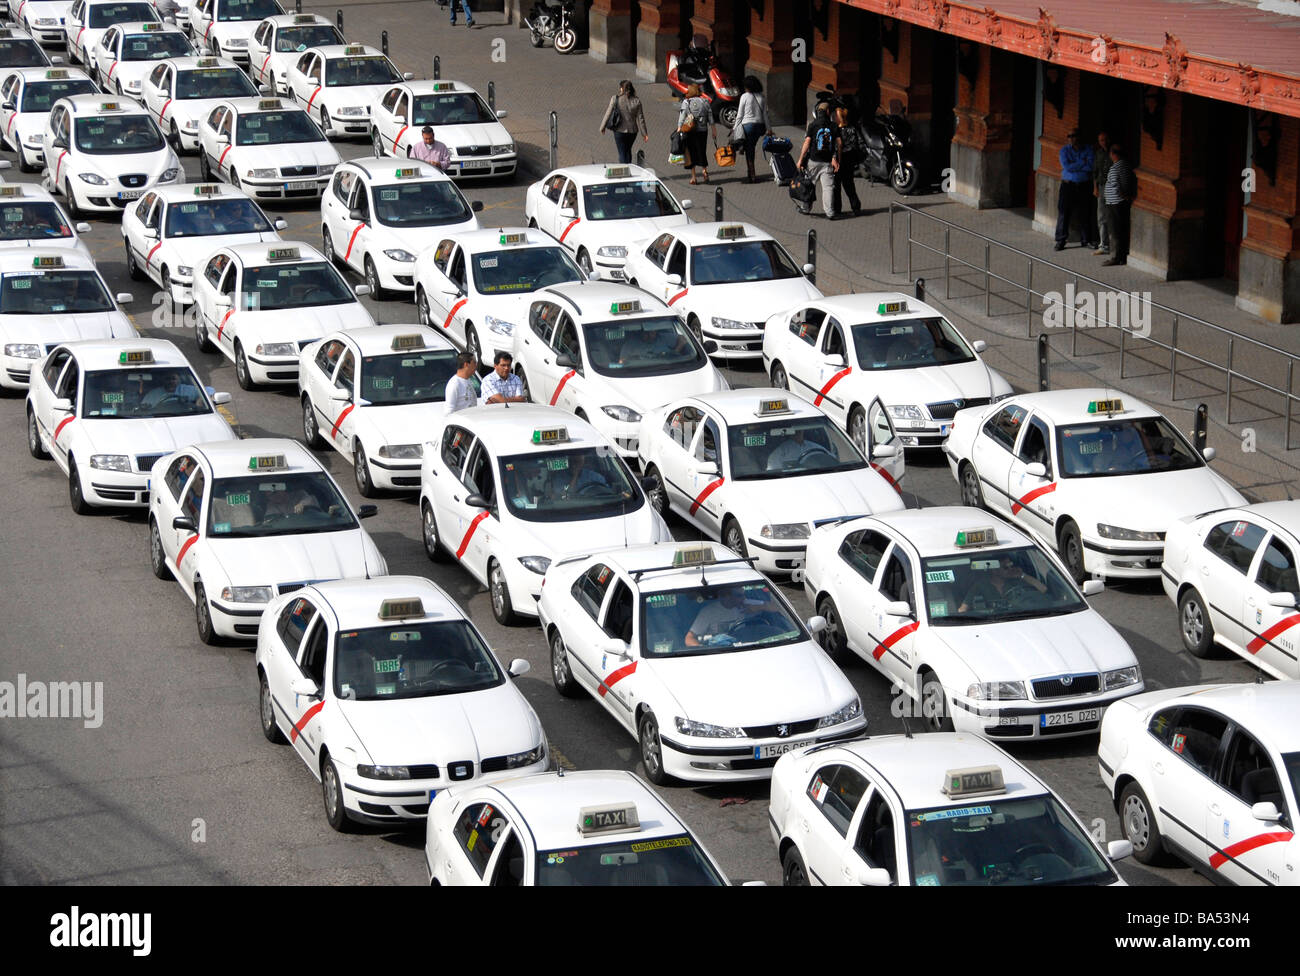 Taxis waiting before Atocha station Madrid Spain Stock Photo